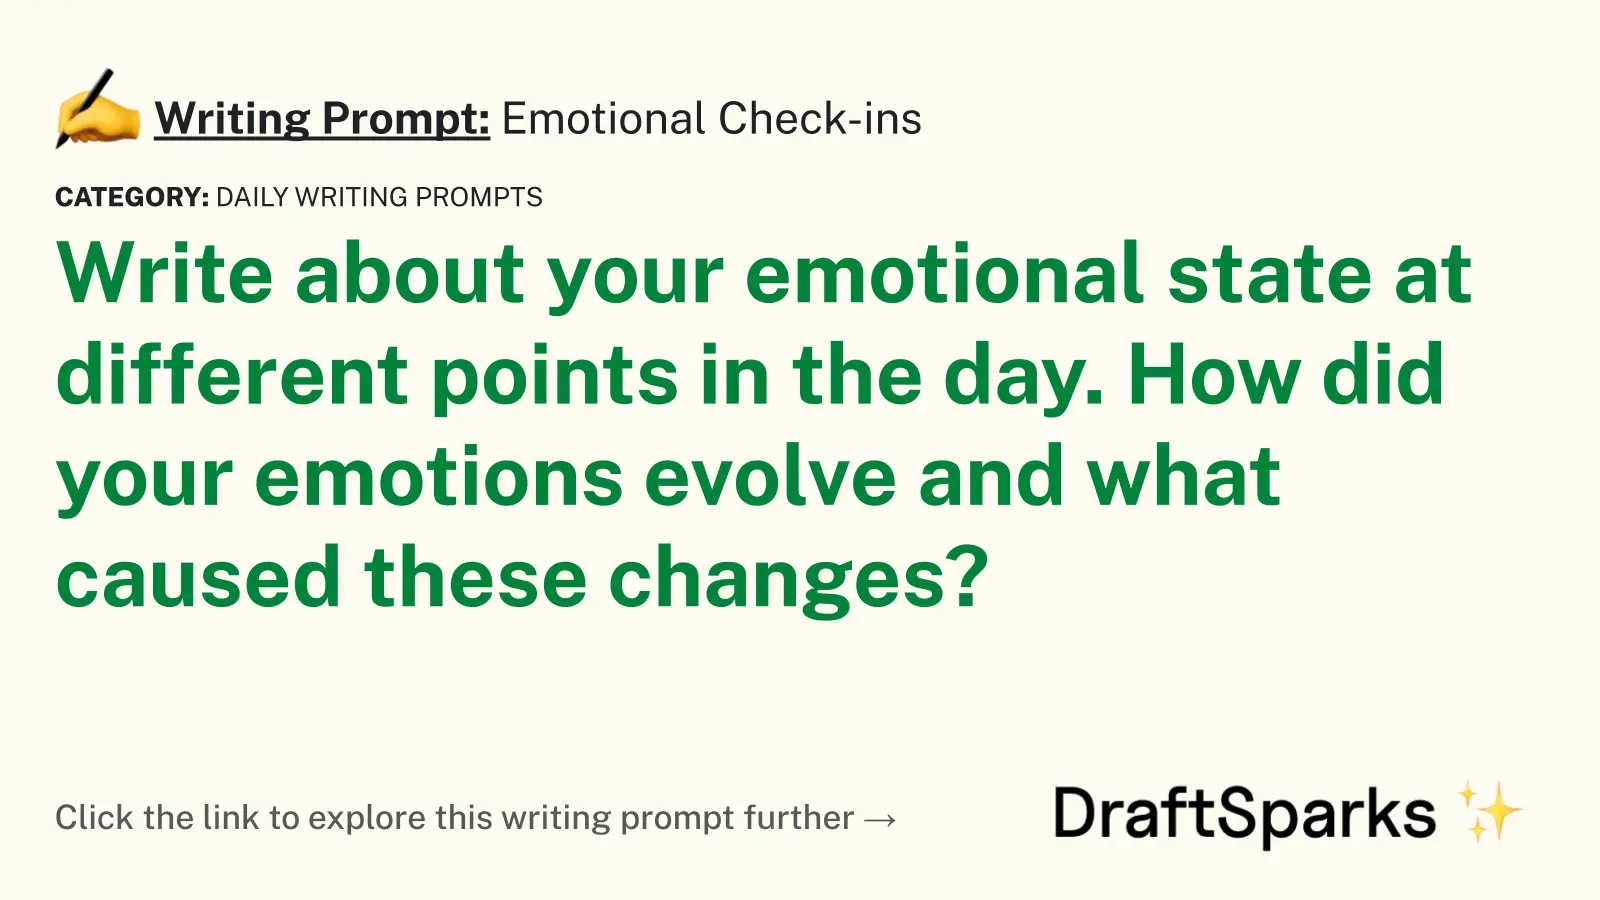 Emotional Check-ins